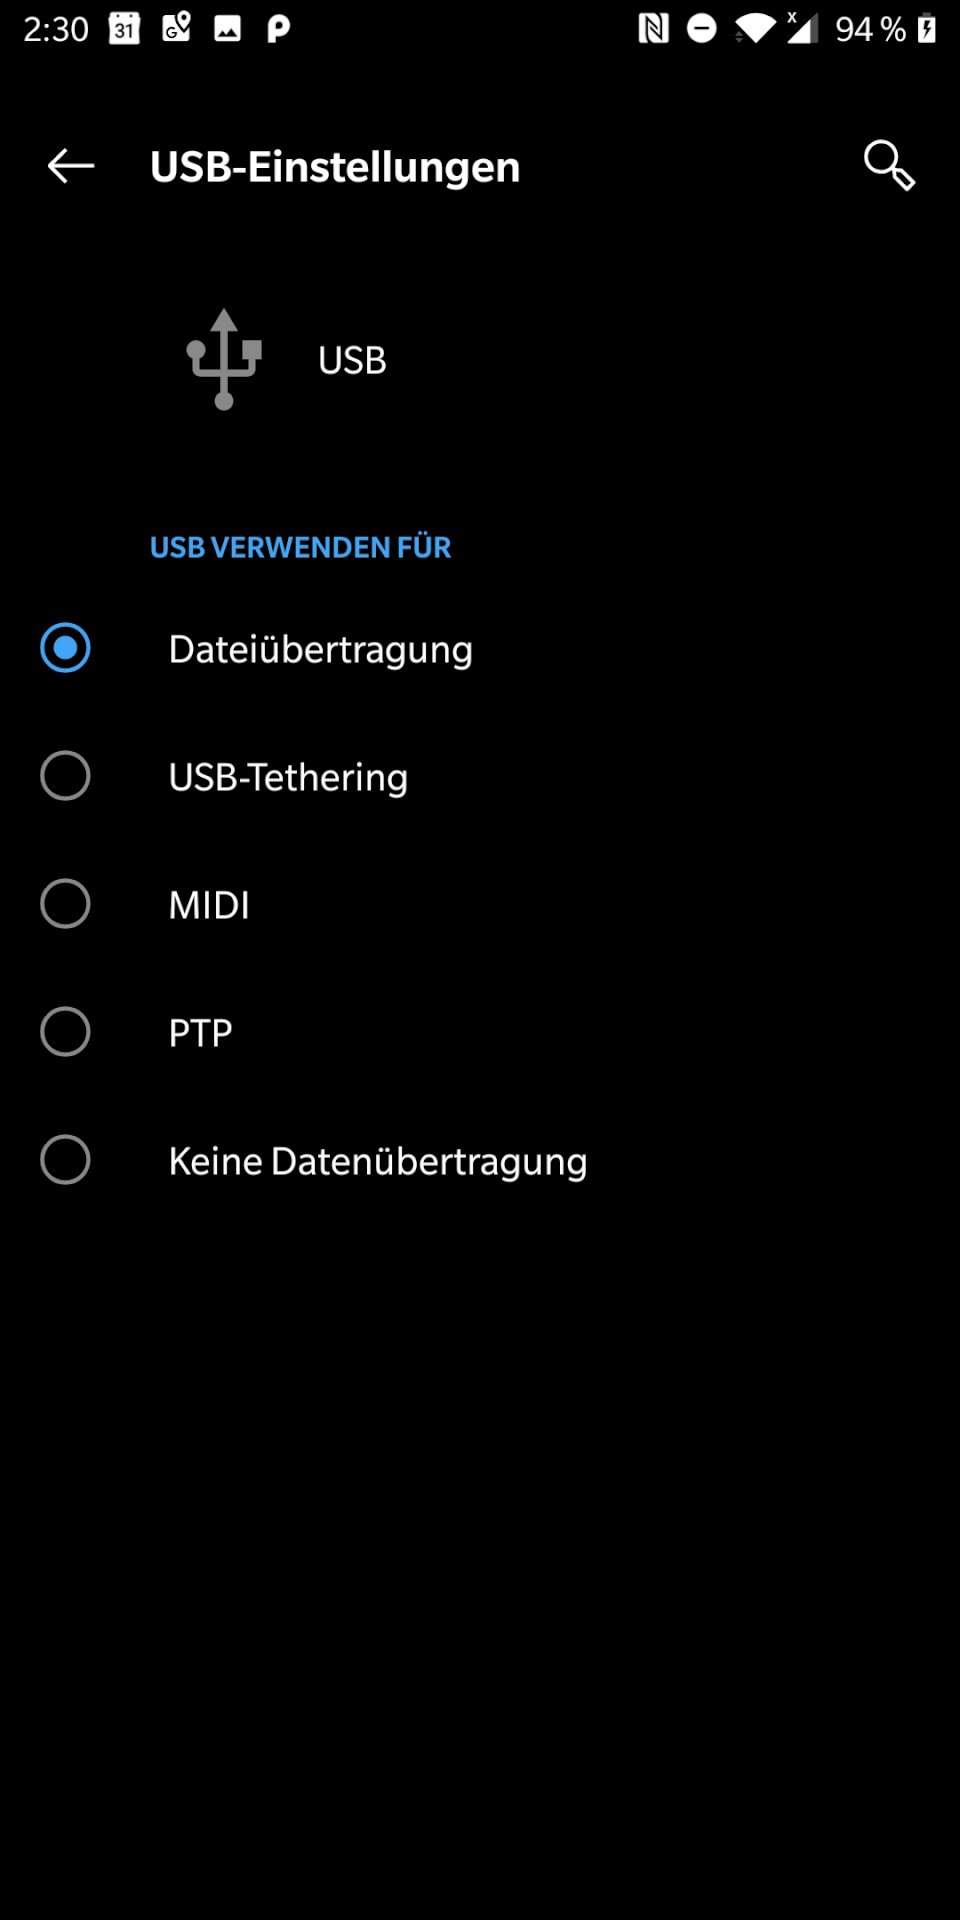 OnePlus 5t data transfer via USB to Mac is not working